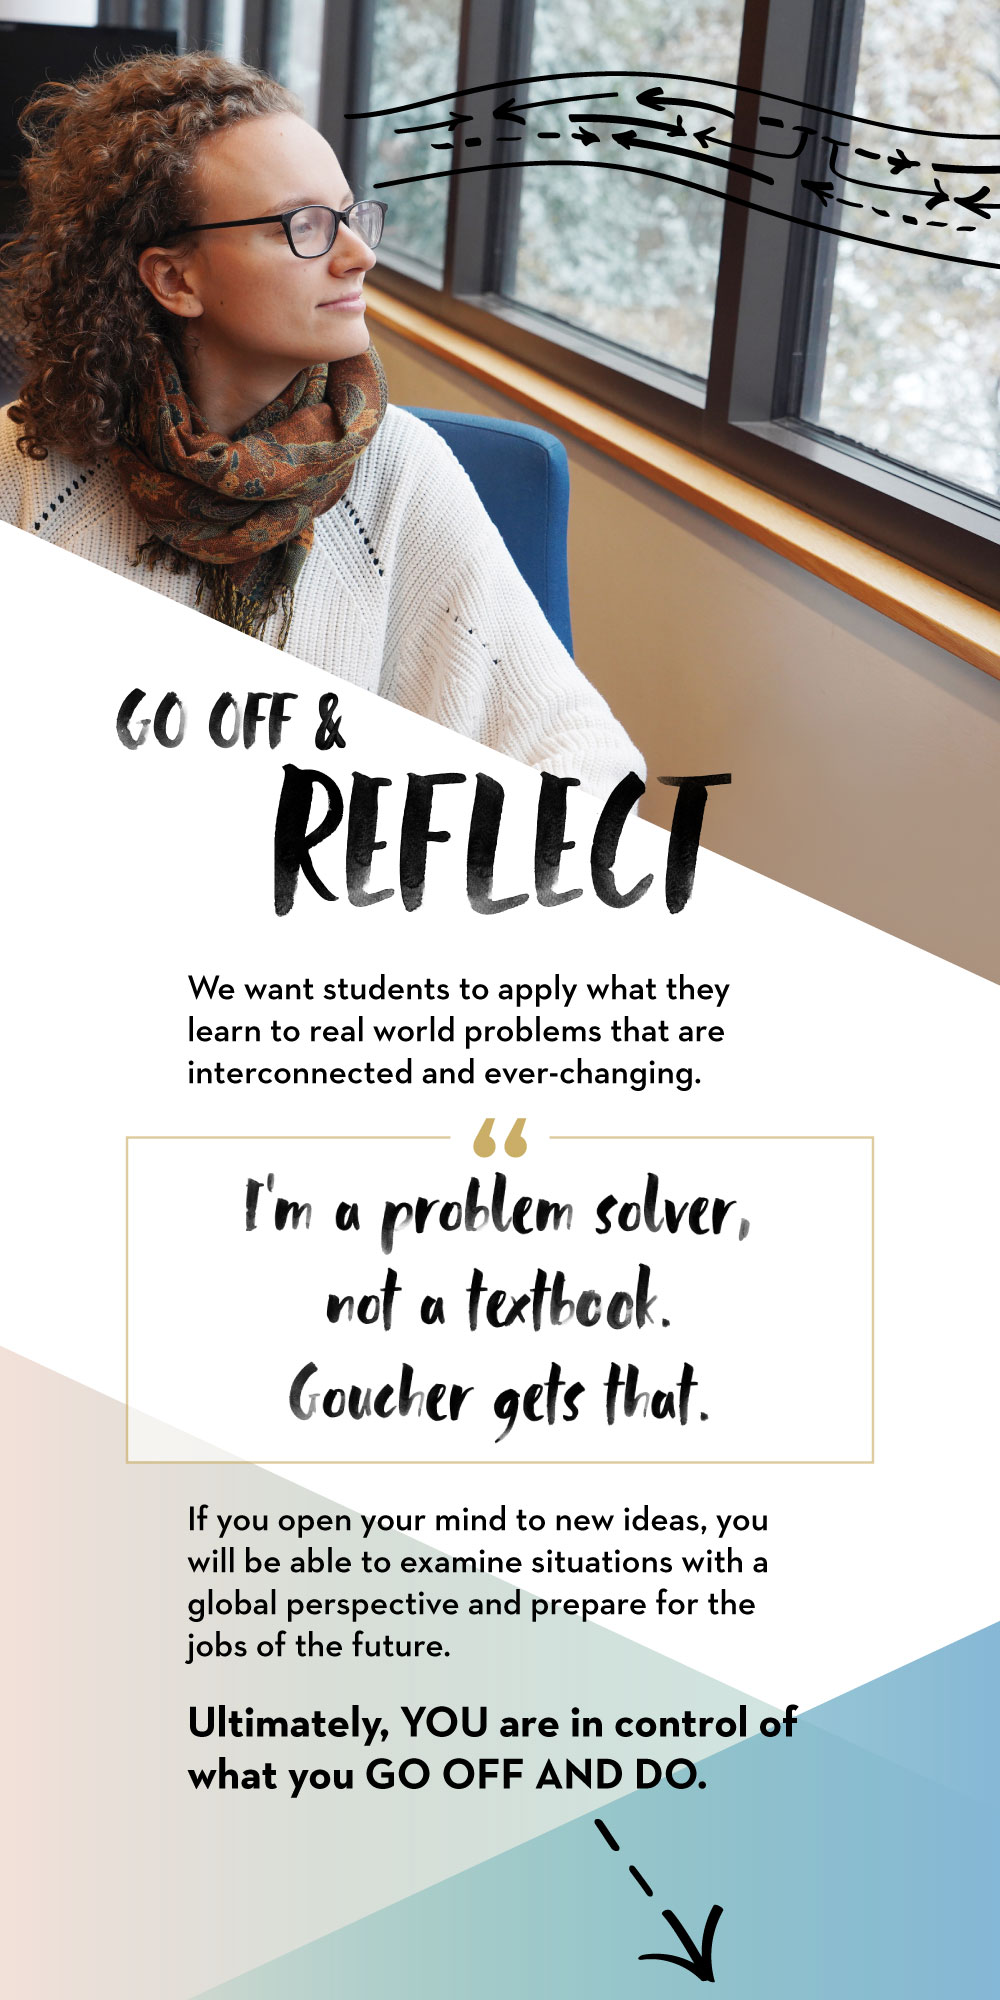 Go off and reflect. We want students to apply what they learn to real world problems that are interconnected and ever-changing.